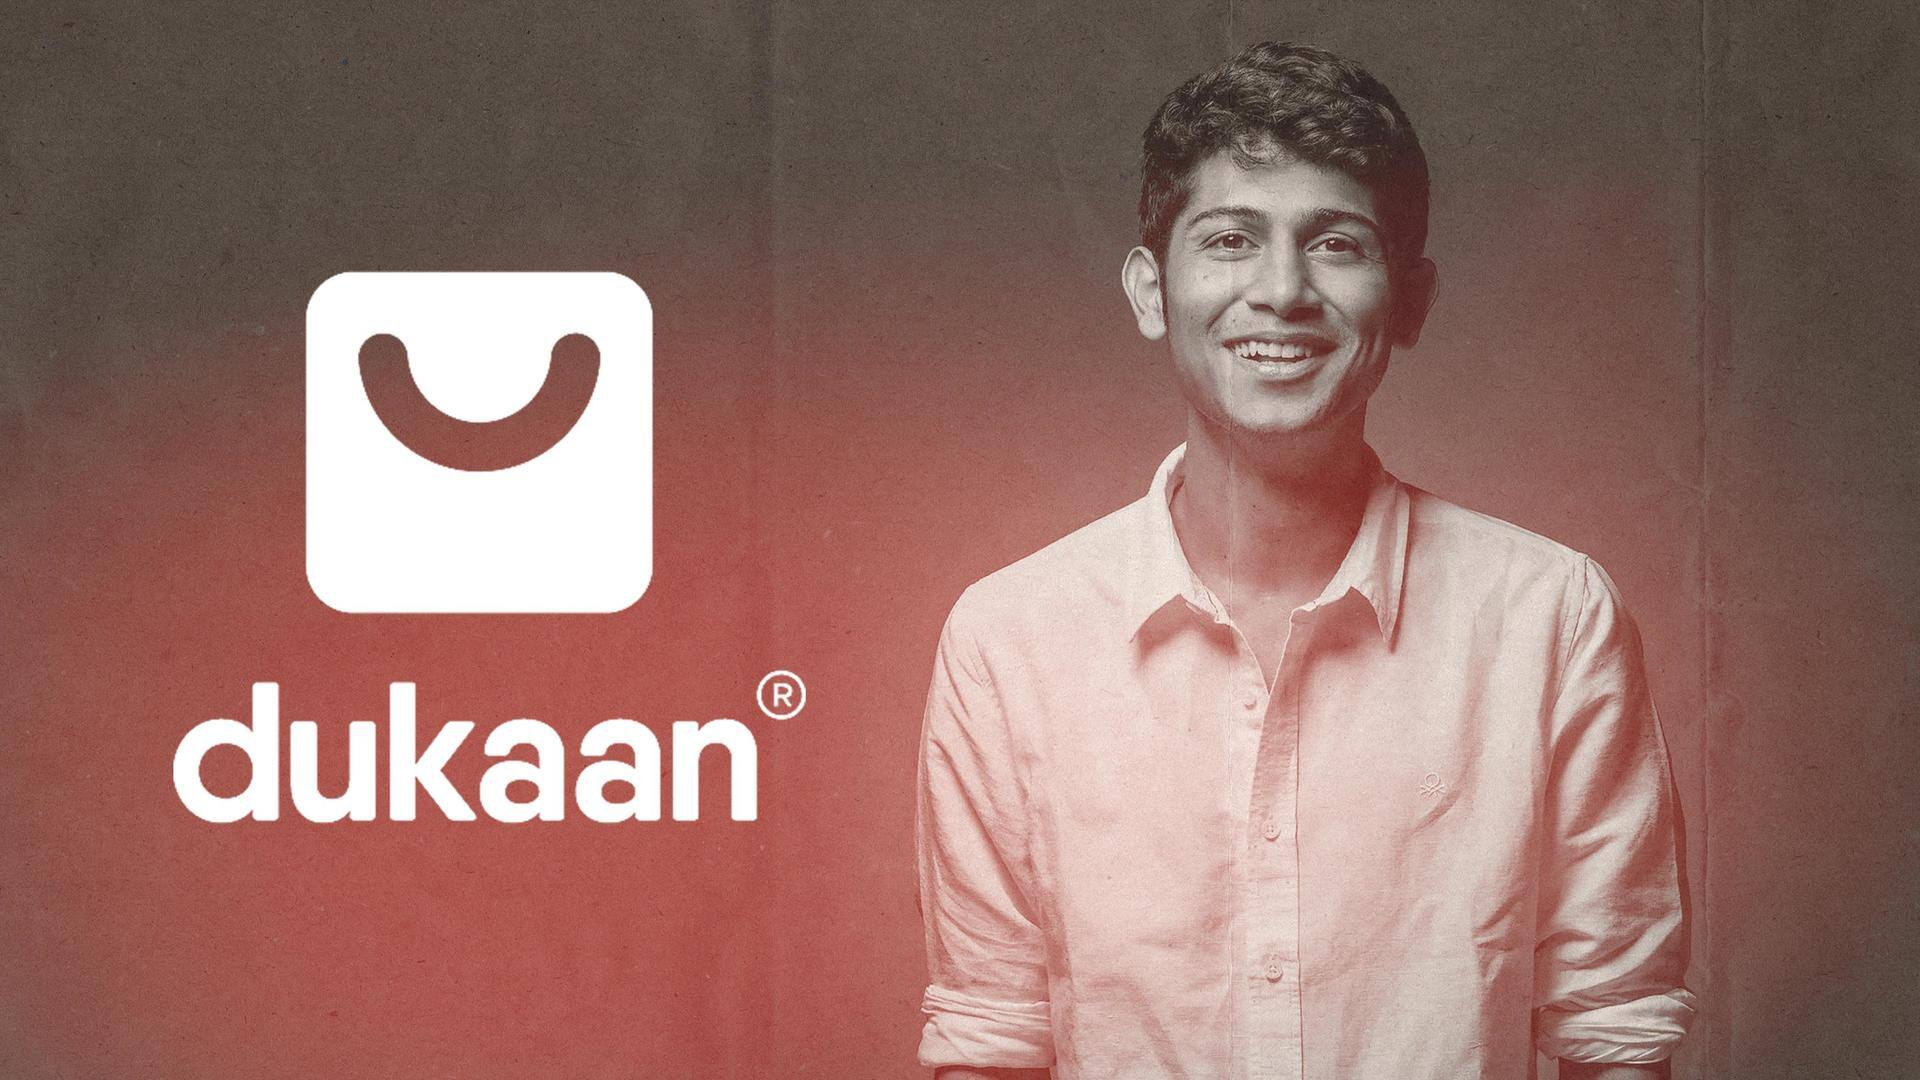 Dukaan replaces 90% support staff with AI; CEO faces backlash